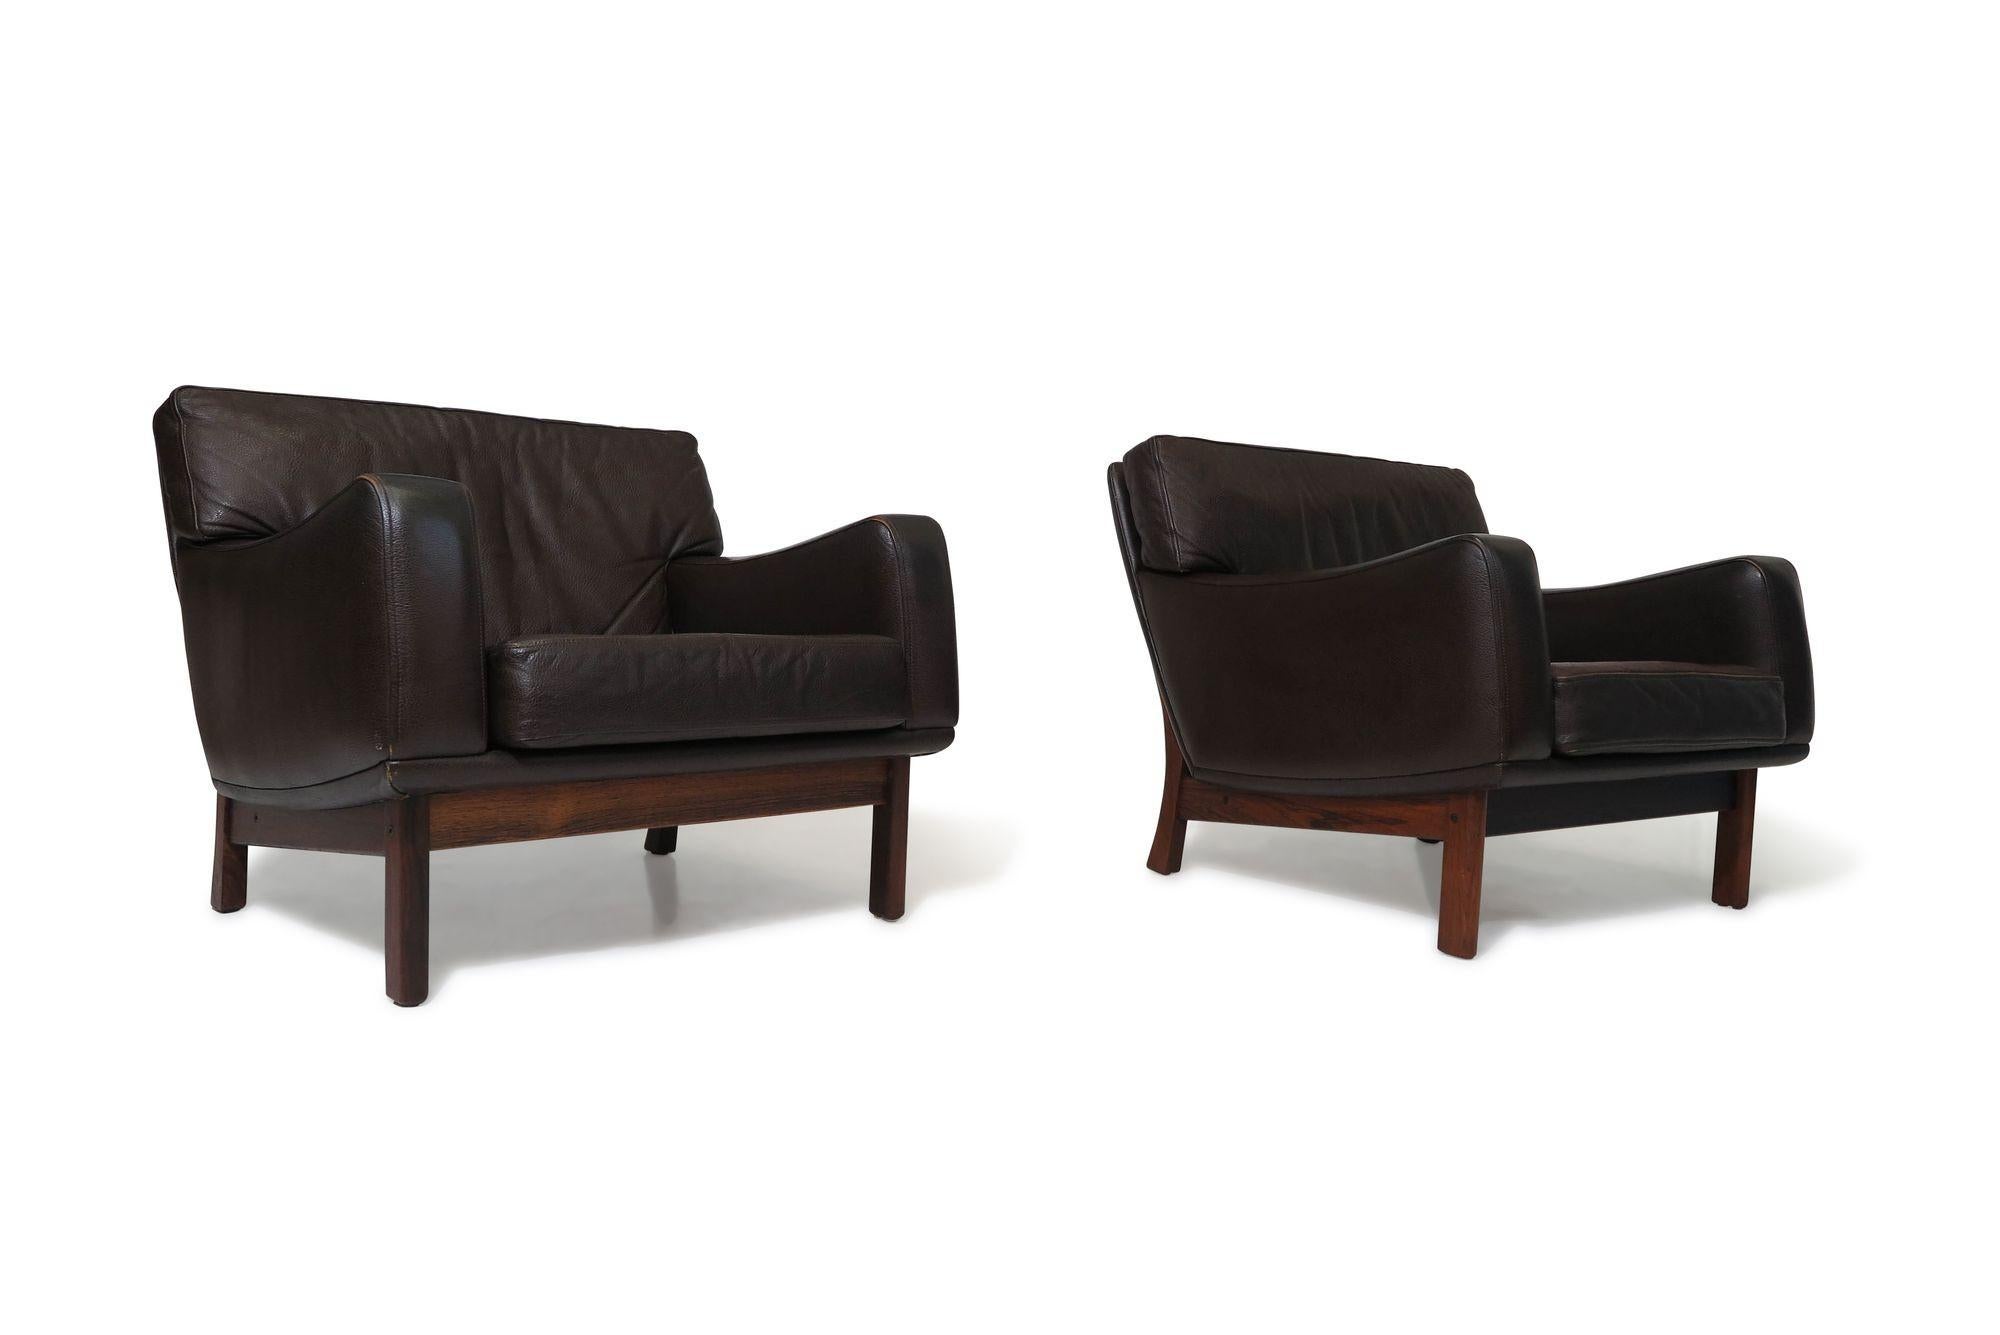 High-quality Danish lounge chairs crafted with solid wood frames and upholstered in the original brown leather. These chairs feature double top-stitched cushions in grainy leather and are raised on flared, sculpted rosewood legs, offering